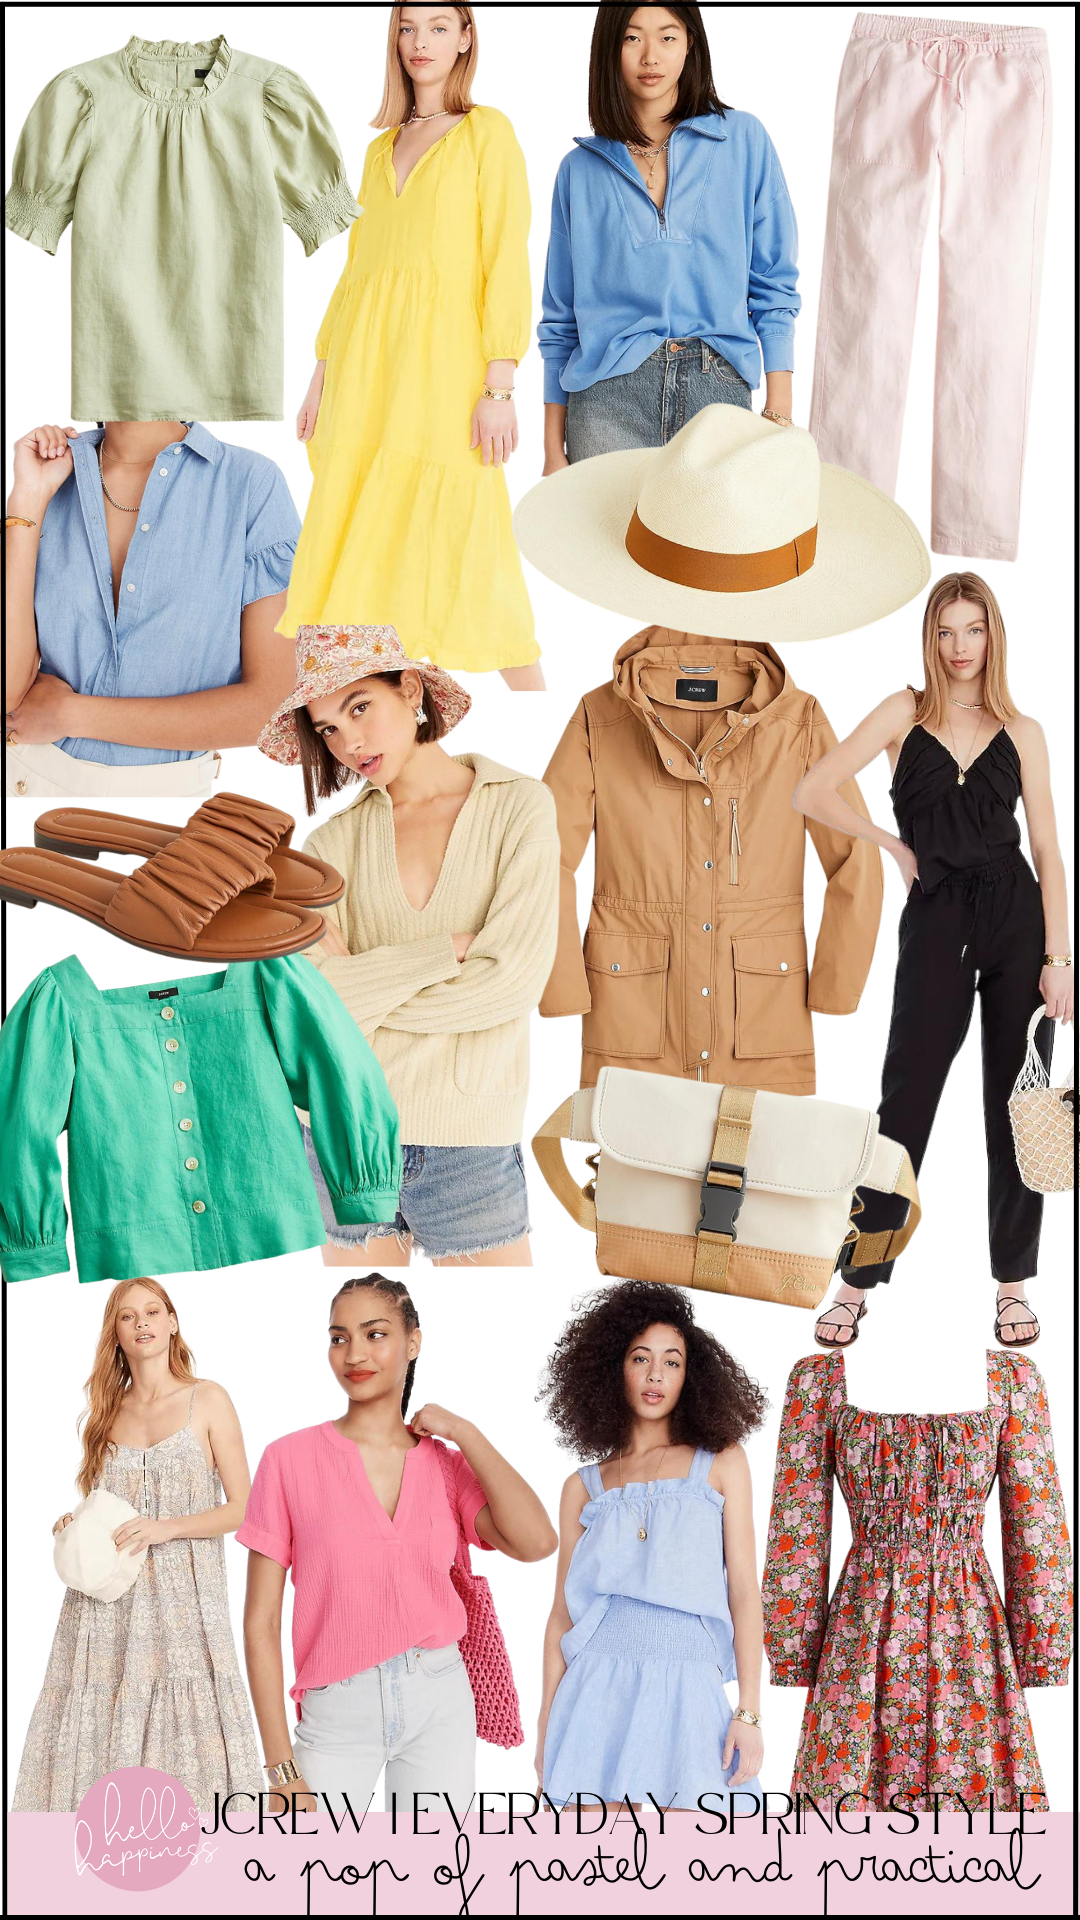 jcrew spring everyday style featured by top Nashville fashion blogger, Hello Happiness.